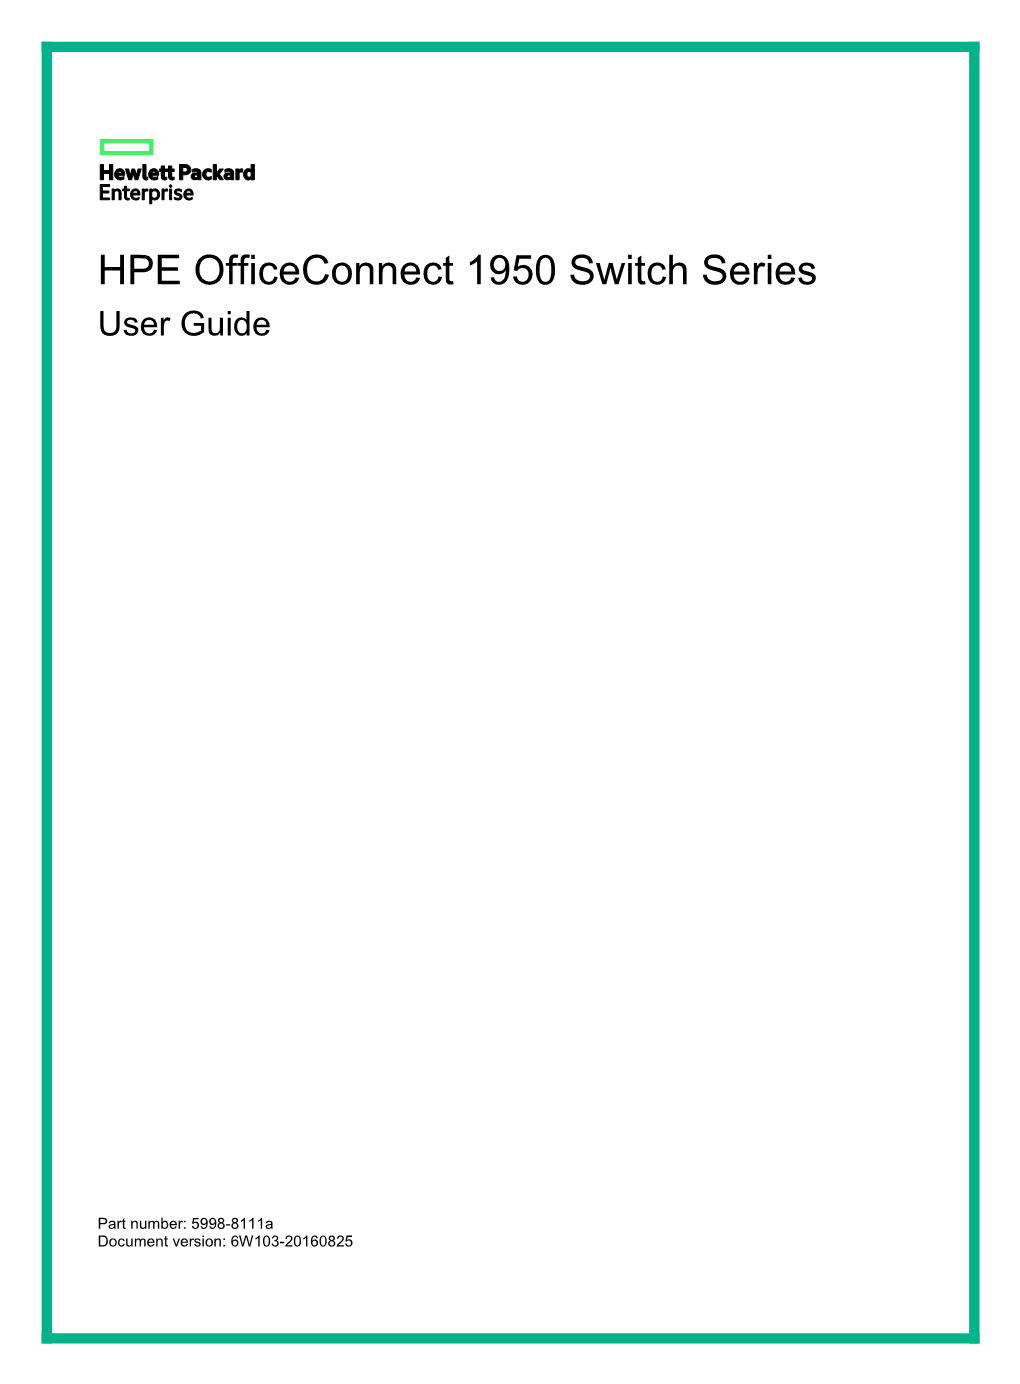 HPE Officeconnect 1950 Switch Series User Guide